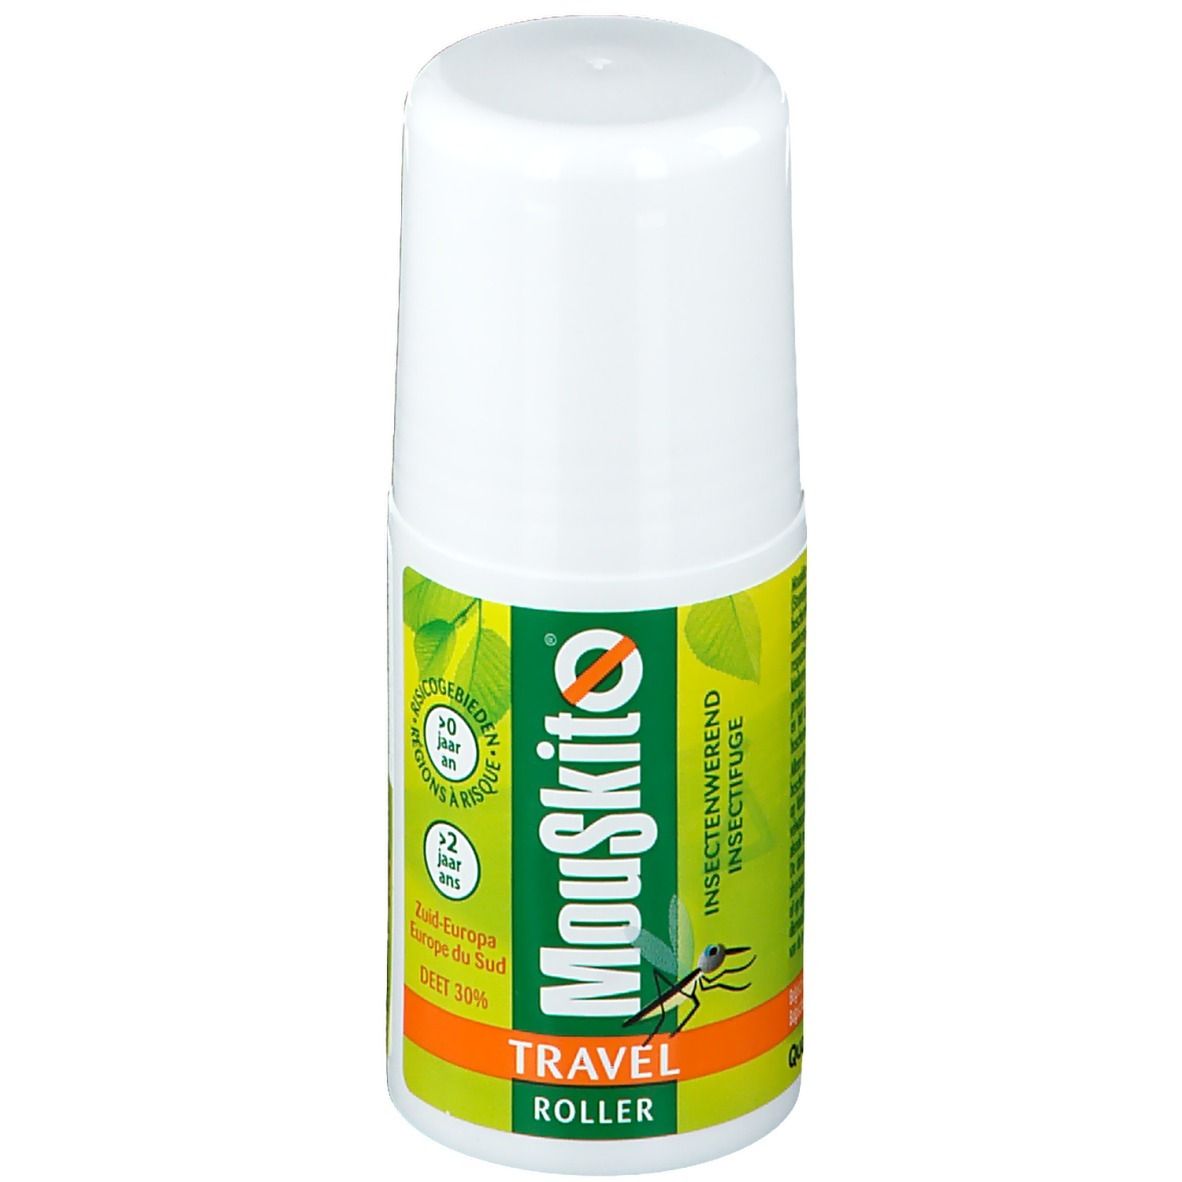 Mouskito® Travel Roller